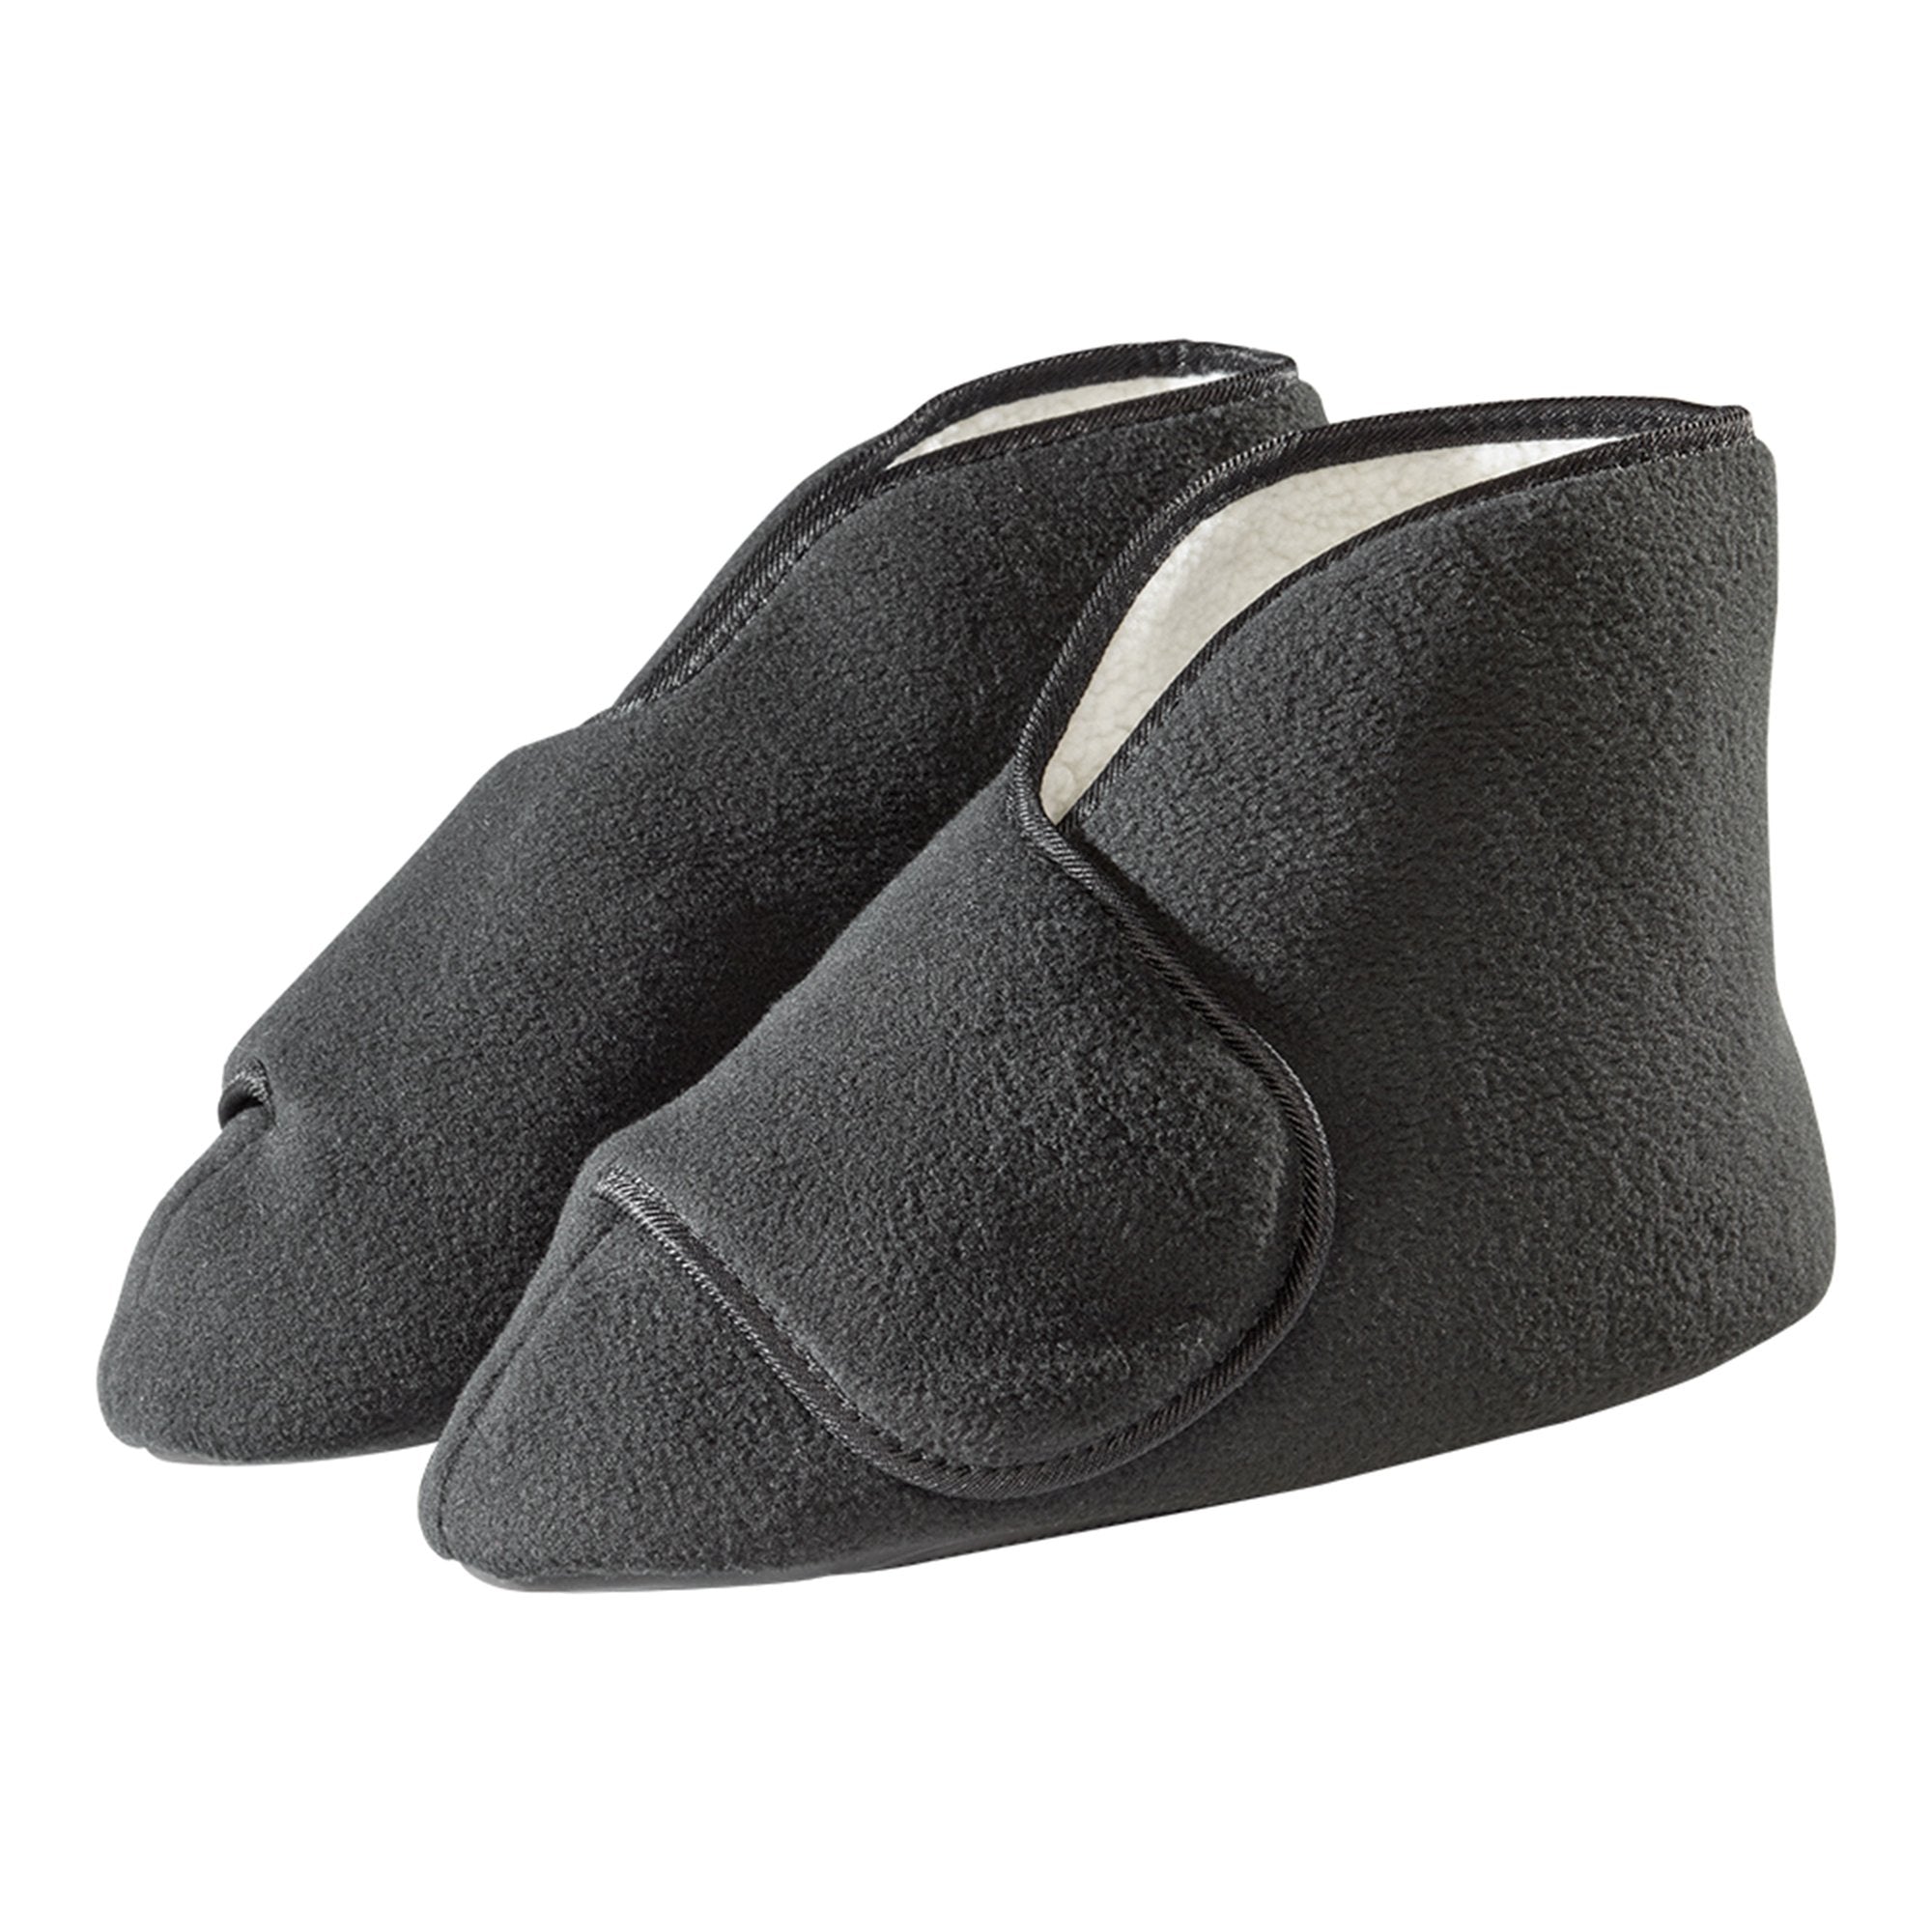 Diabetic Bootie Slippers Silverts® X-Large / X-Wide Black Ankle High